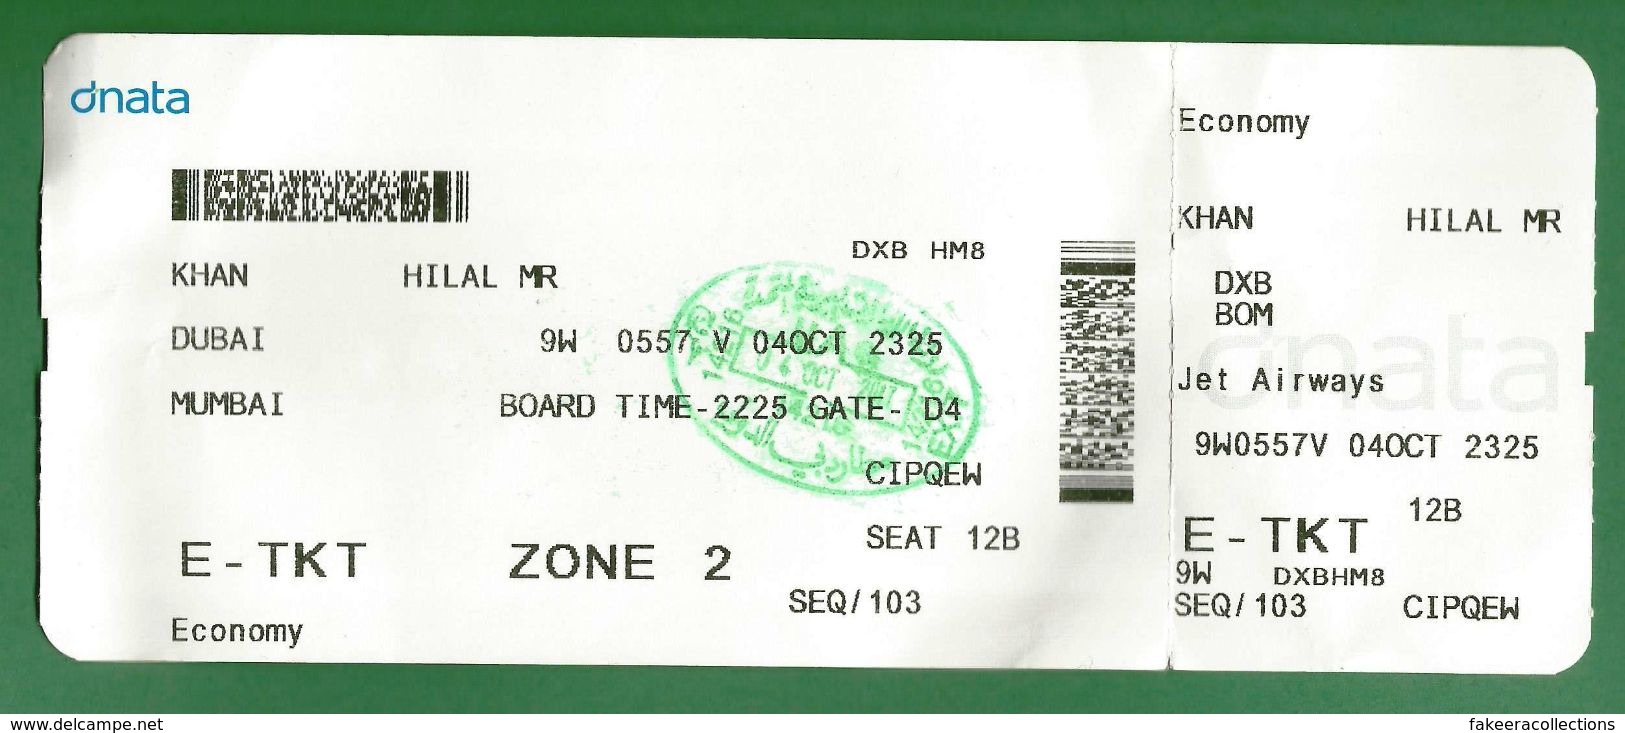 DUBAI, UAE To MUMBAI, INDIA - Boarding Card / Pass For JET AIRWAYS Issued By DNATA - Travel Ticket, Immigration Seal ... - World